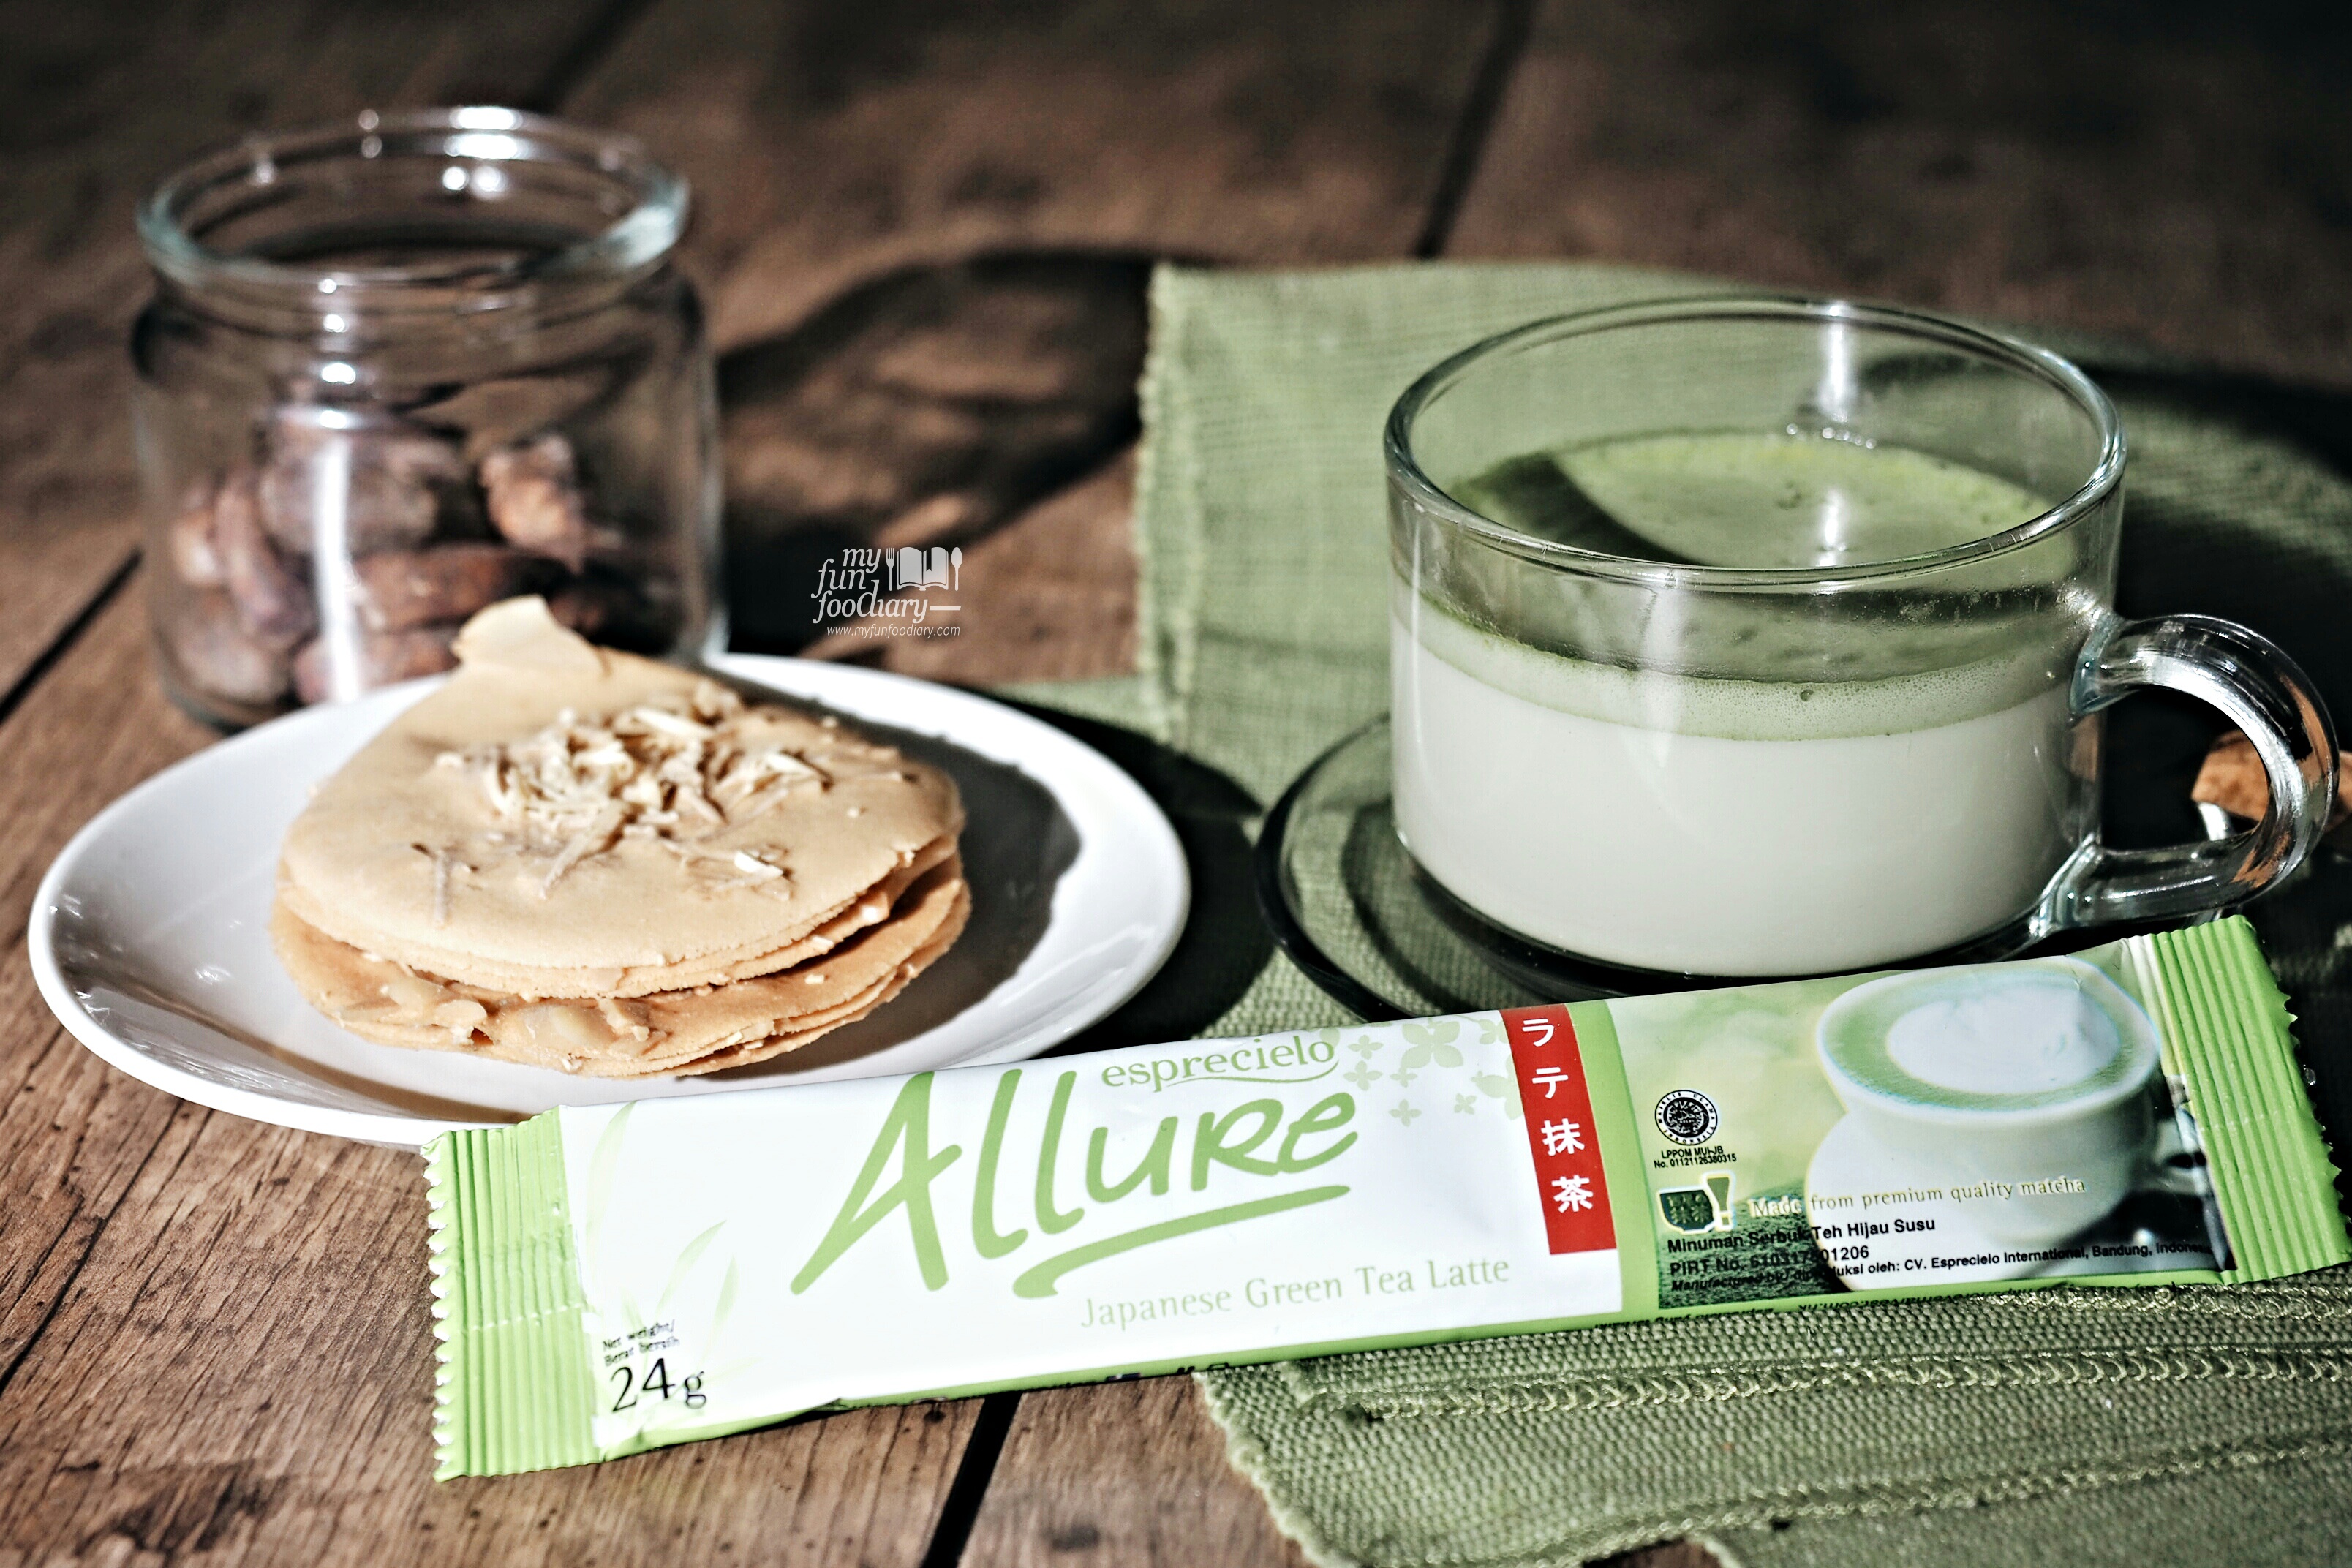 Relaxing Moment with Allure Green Tea at Home by Myfunfoodiary 01